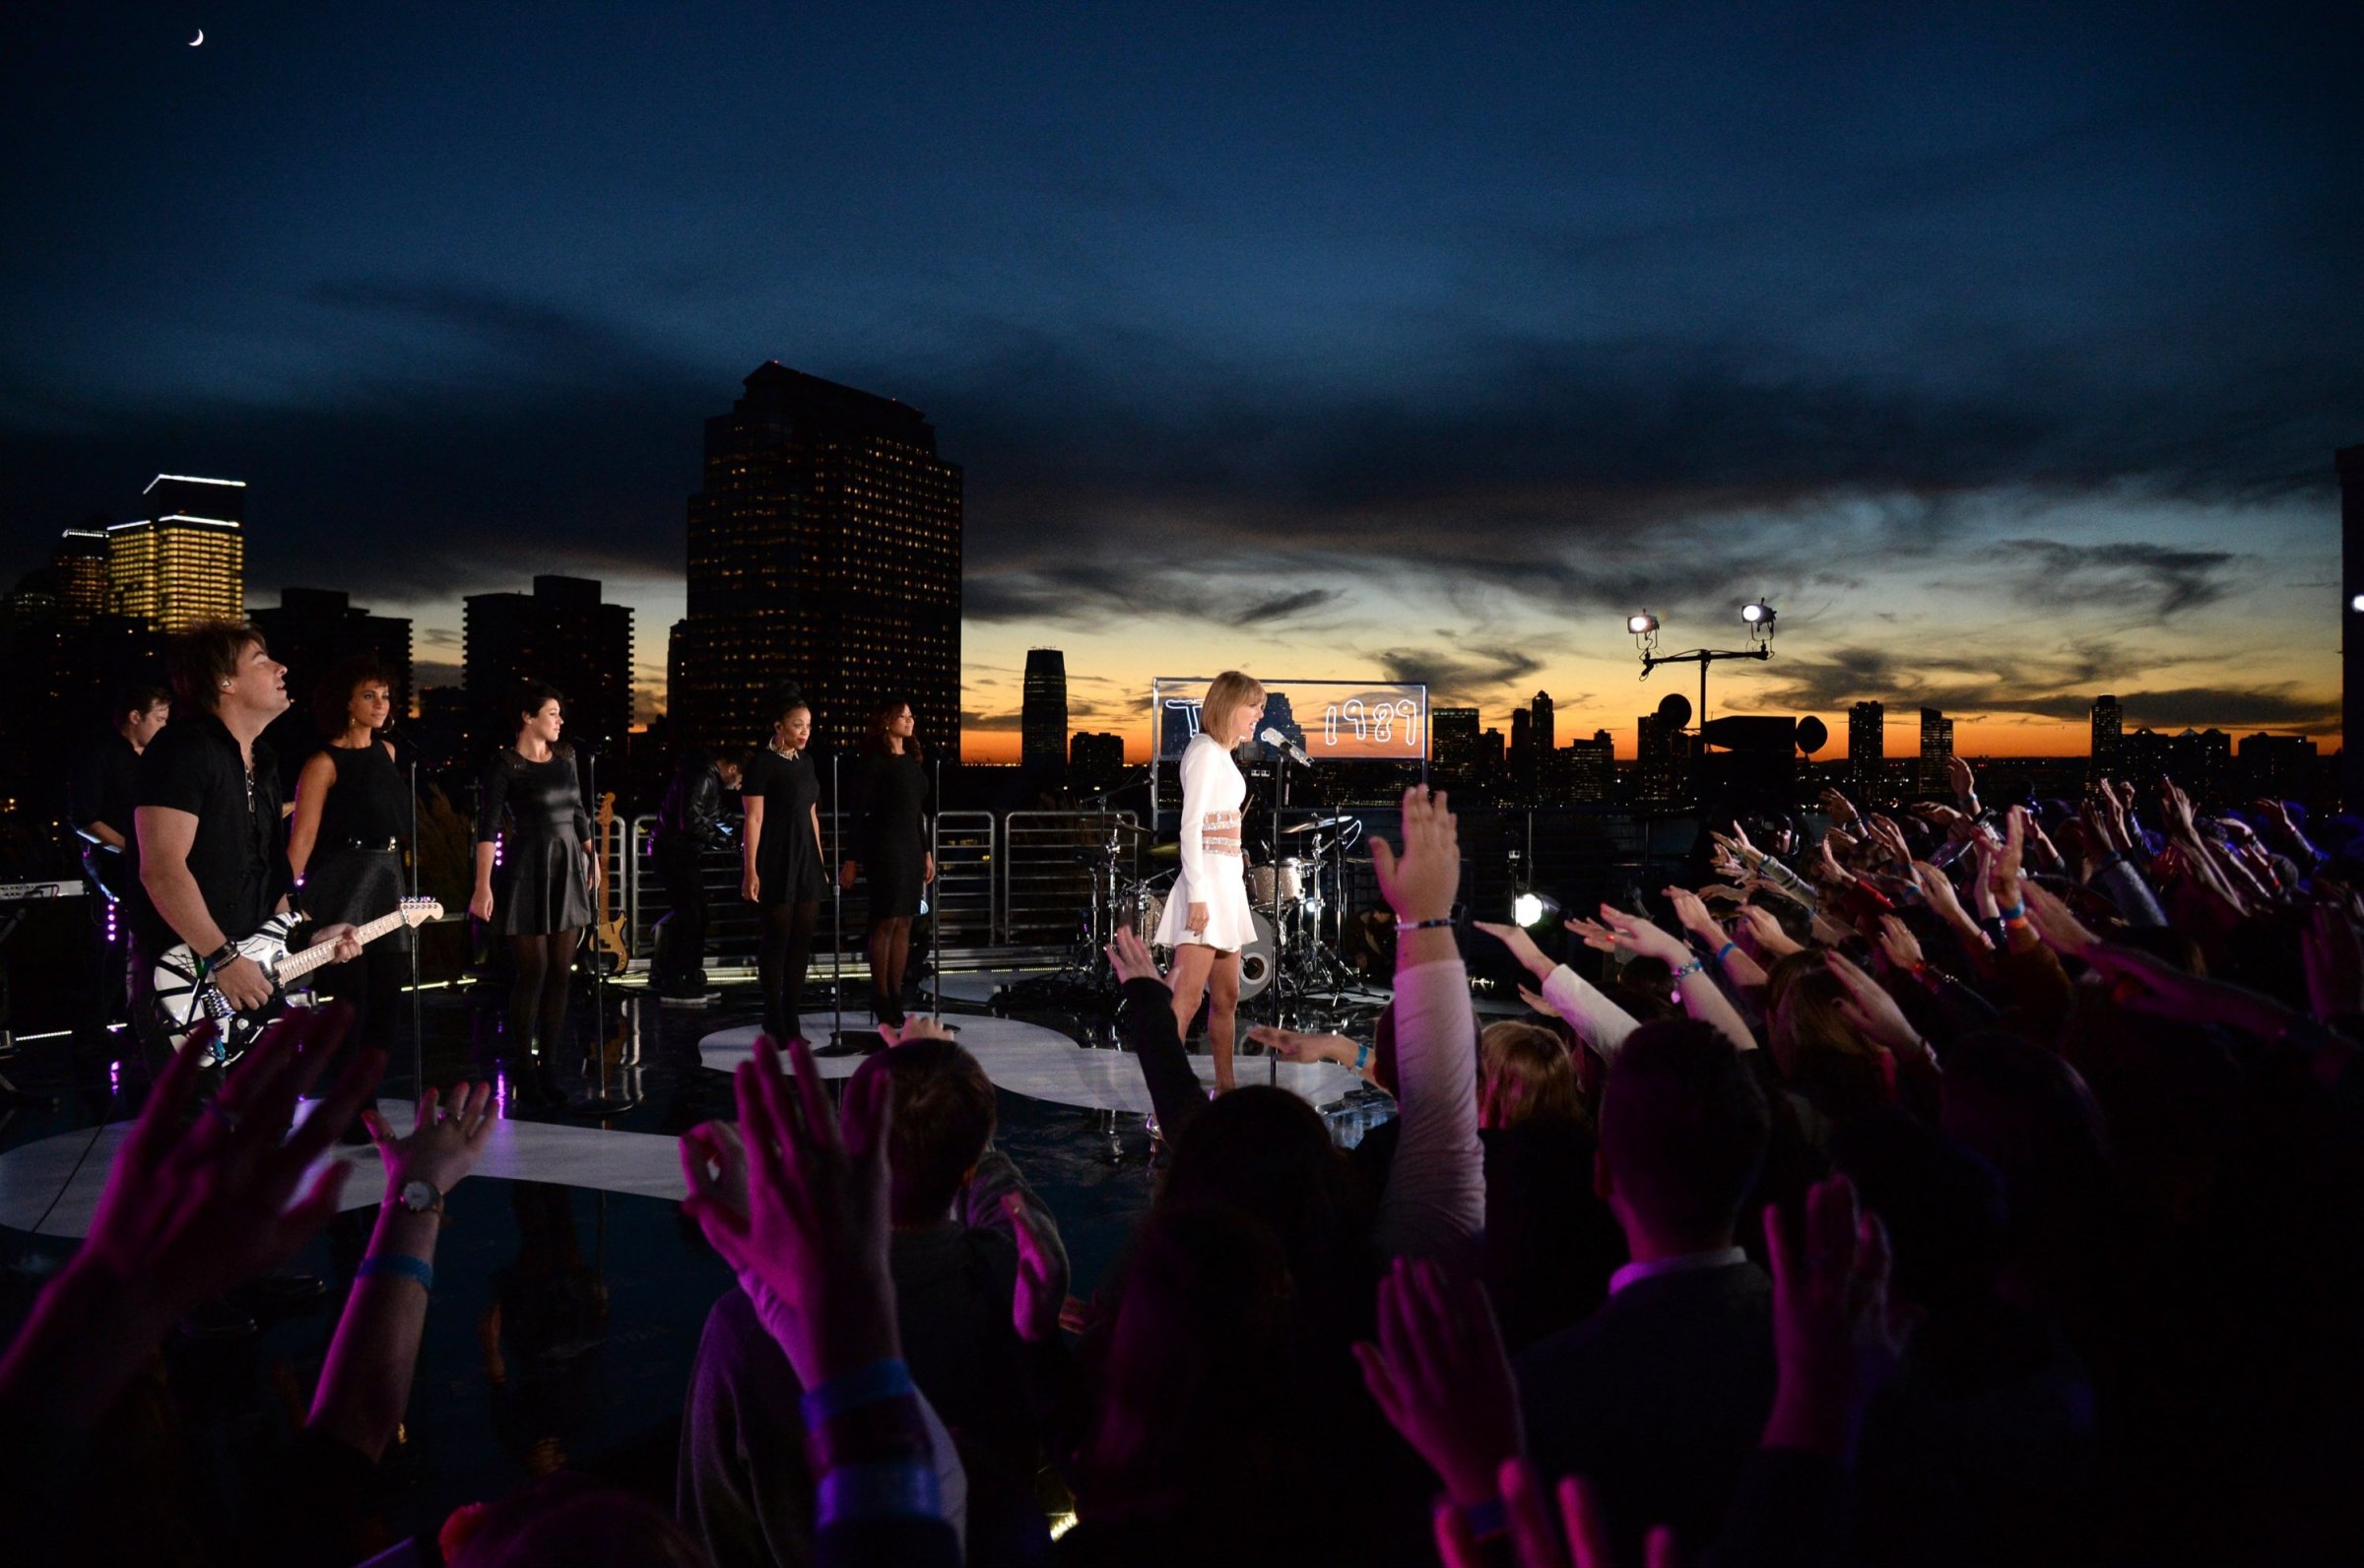 Taylor Swift performs during her 1989 Secret Session with iHeartRadio on Oct. 27, 2014 in New York City.